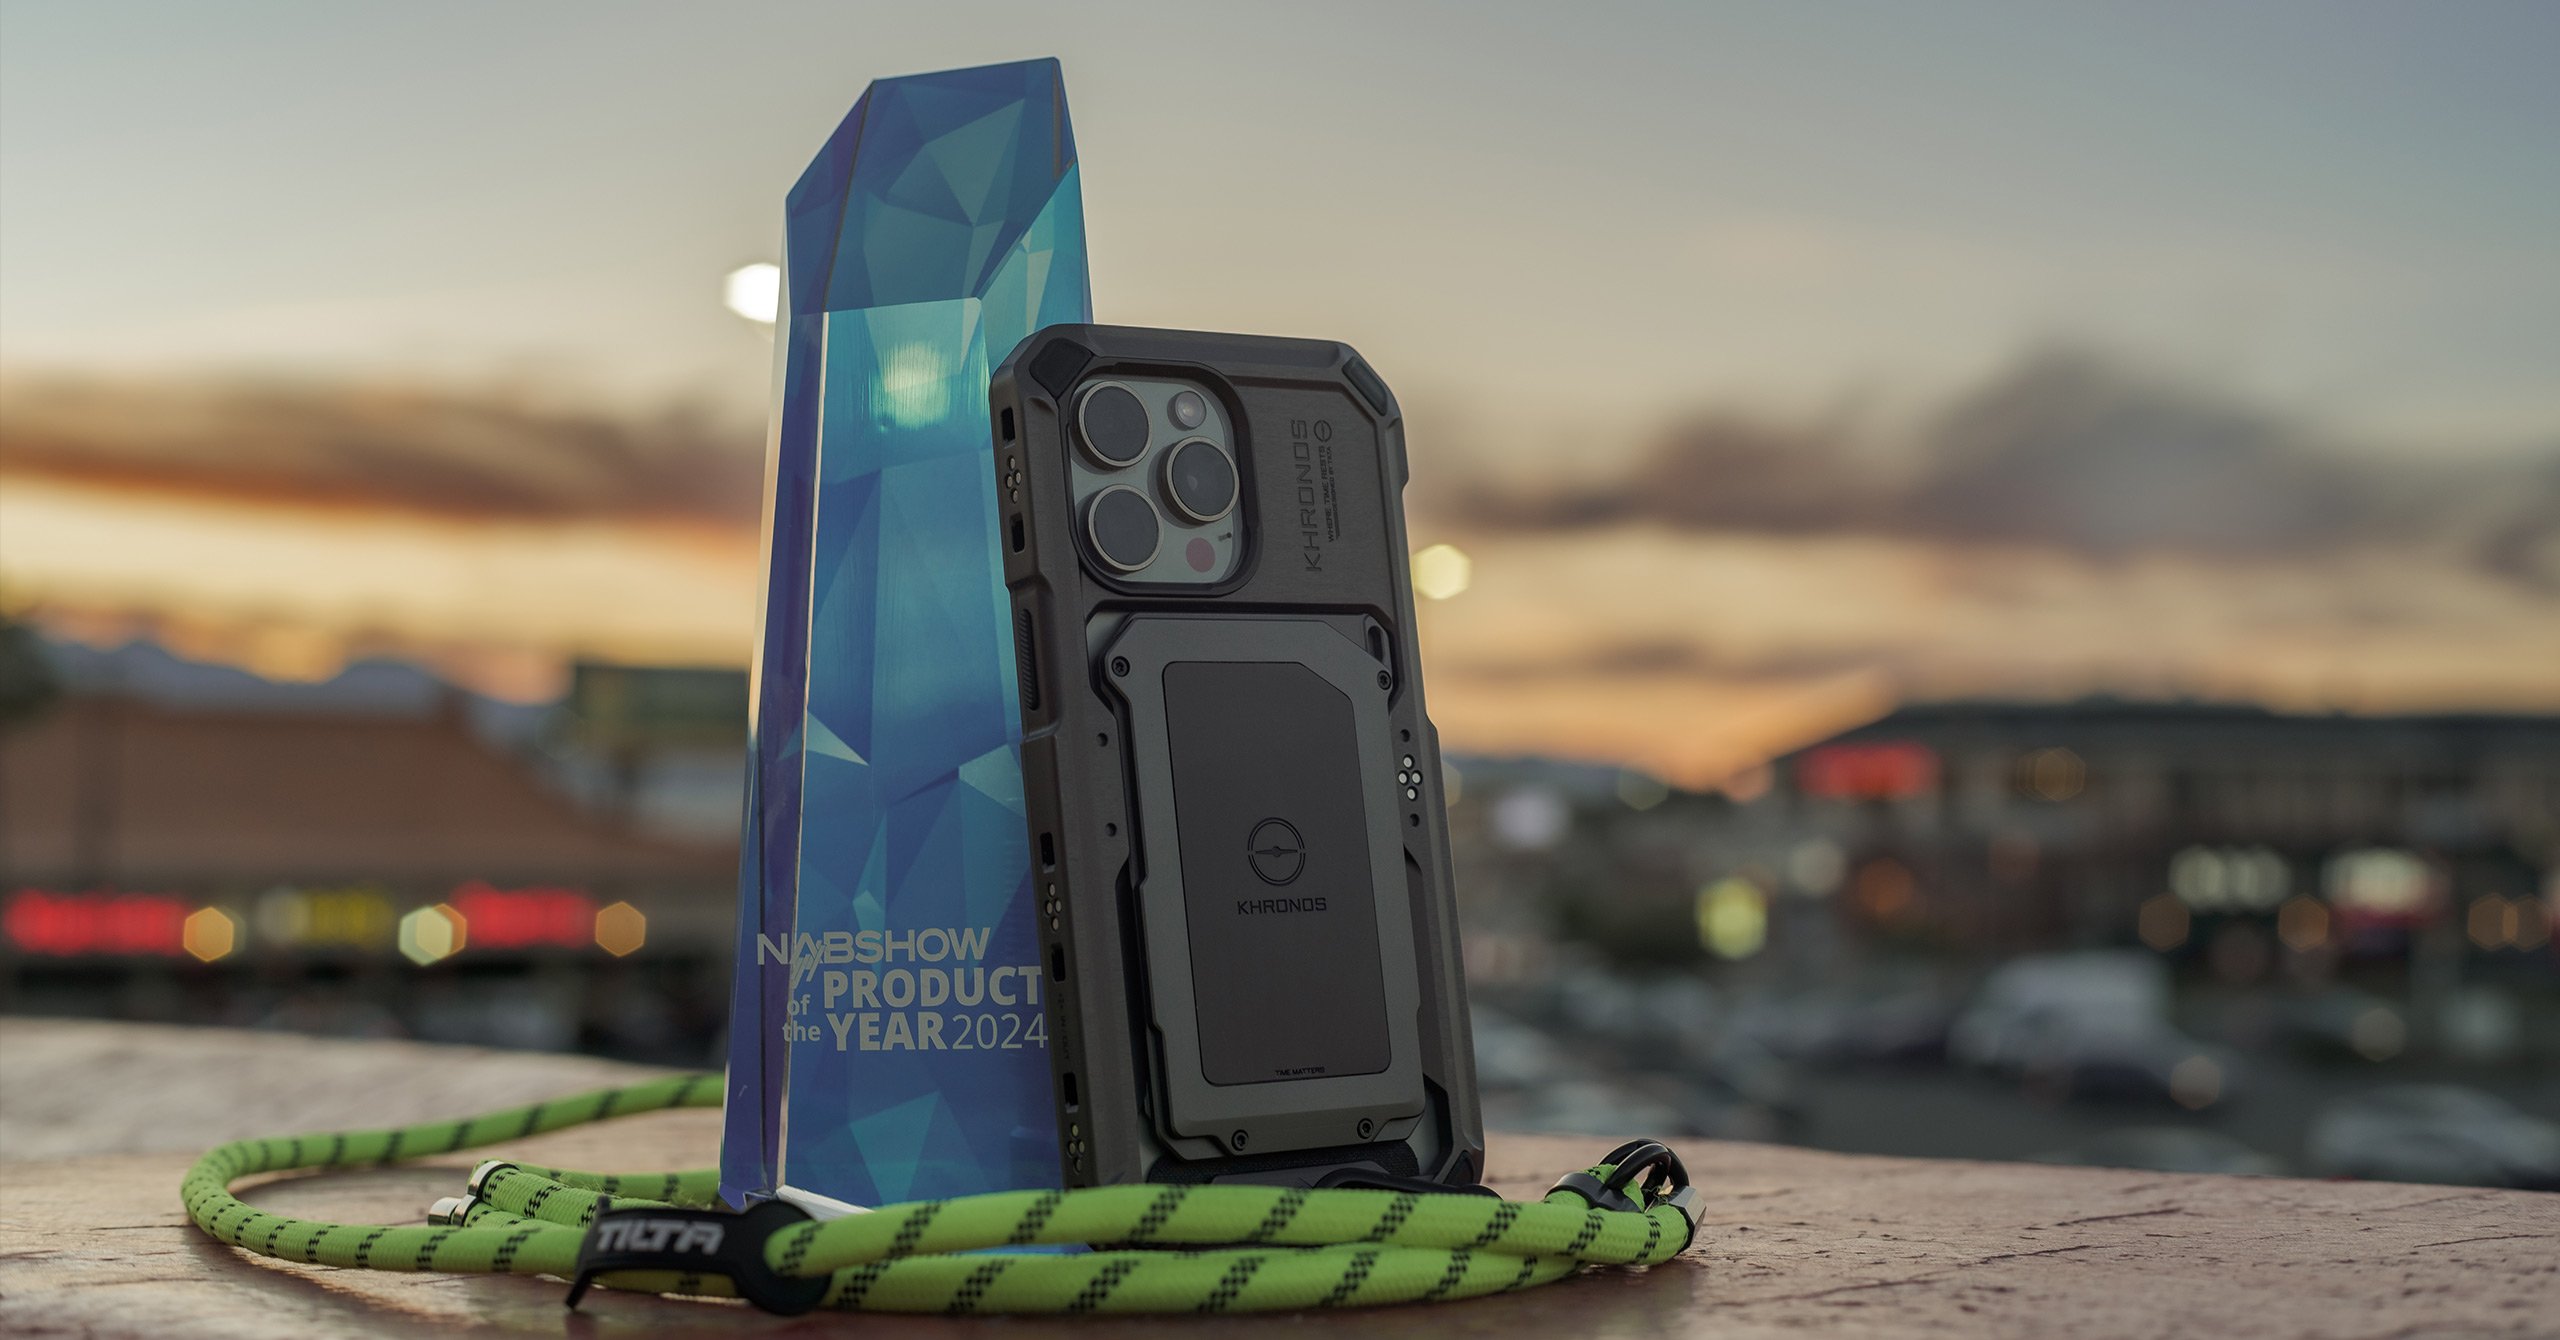 NAB Show Product of the Year Award for Tilta Khronos for iPhone